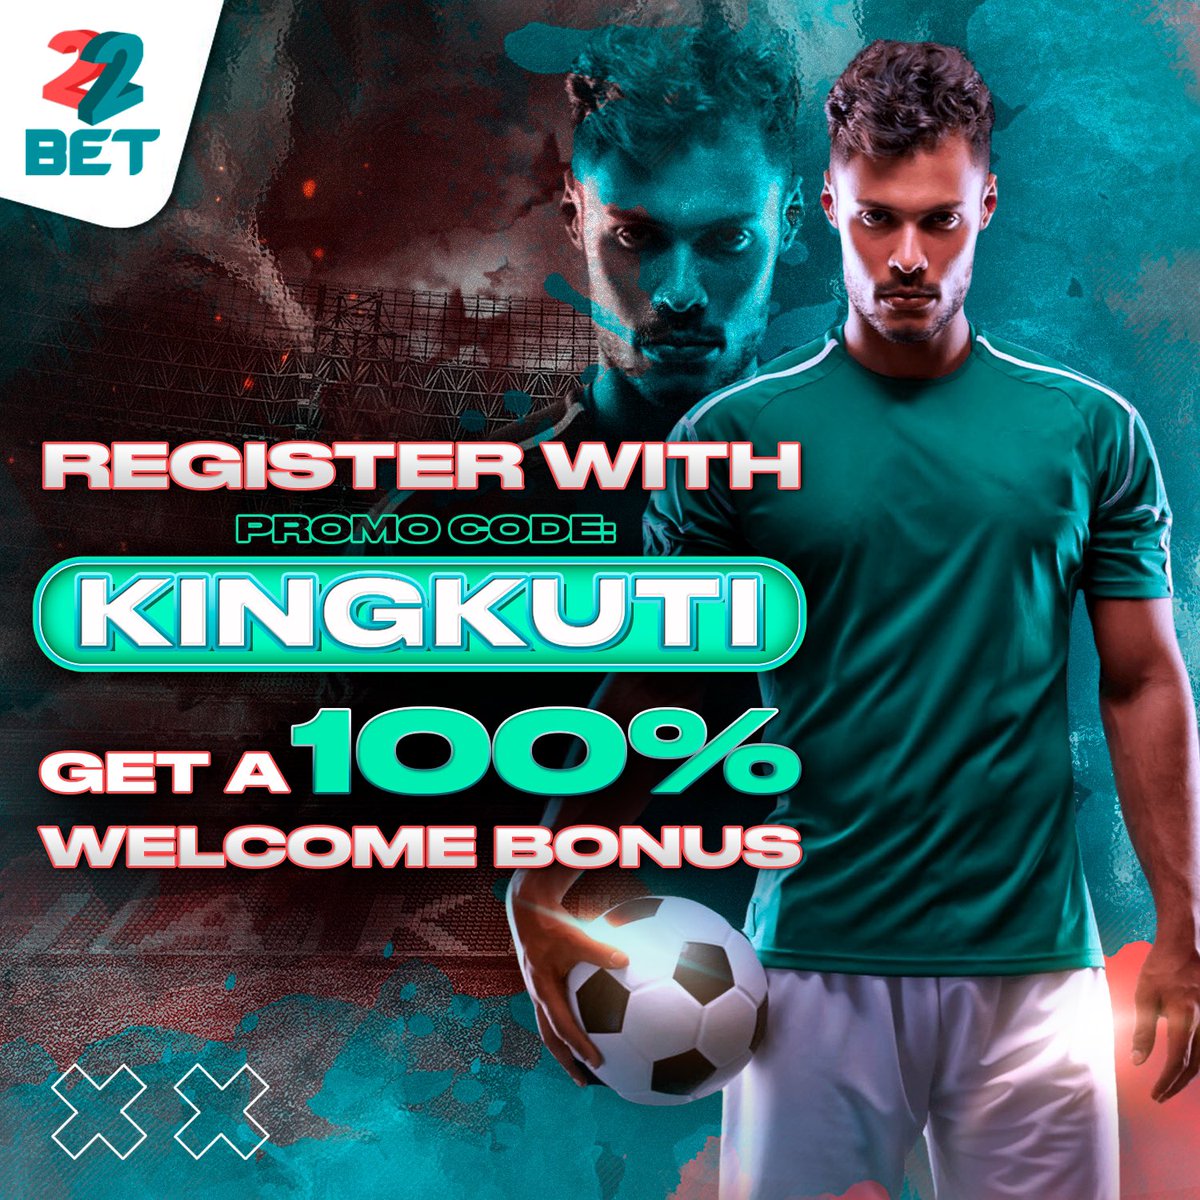 Today’s game on @22betNaija Code 👉 SNNSD Have you Registered on 22bet yet?? Register now using this link 👇👇👇 cutt.ly/4wiuliqi Promo Code ➡️ KingKuti